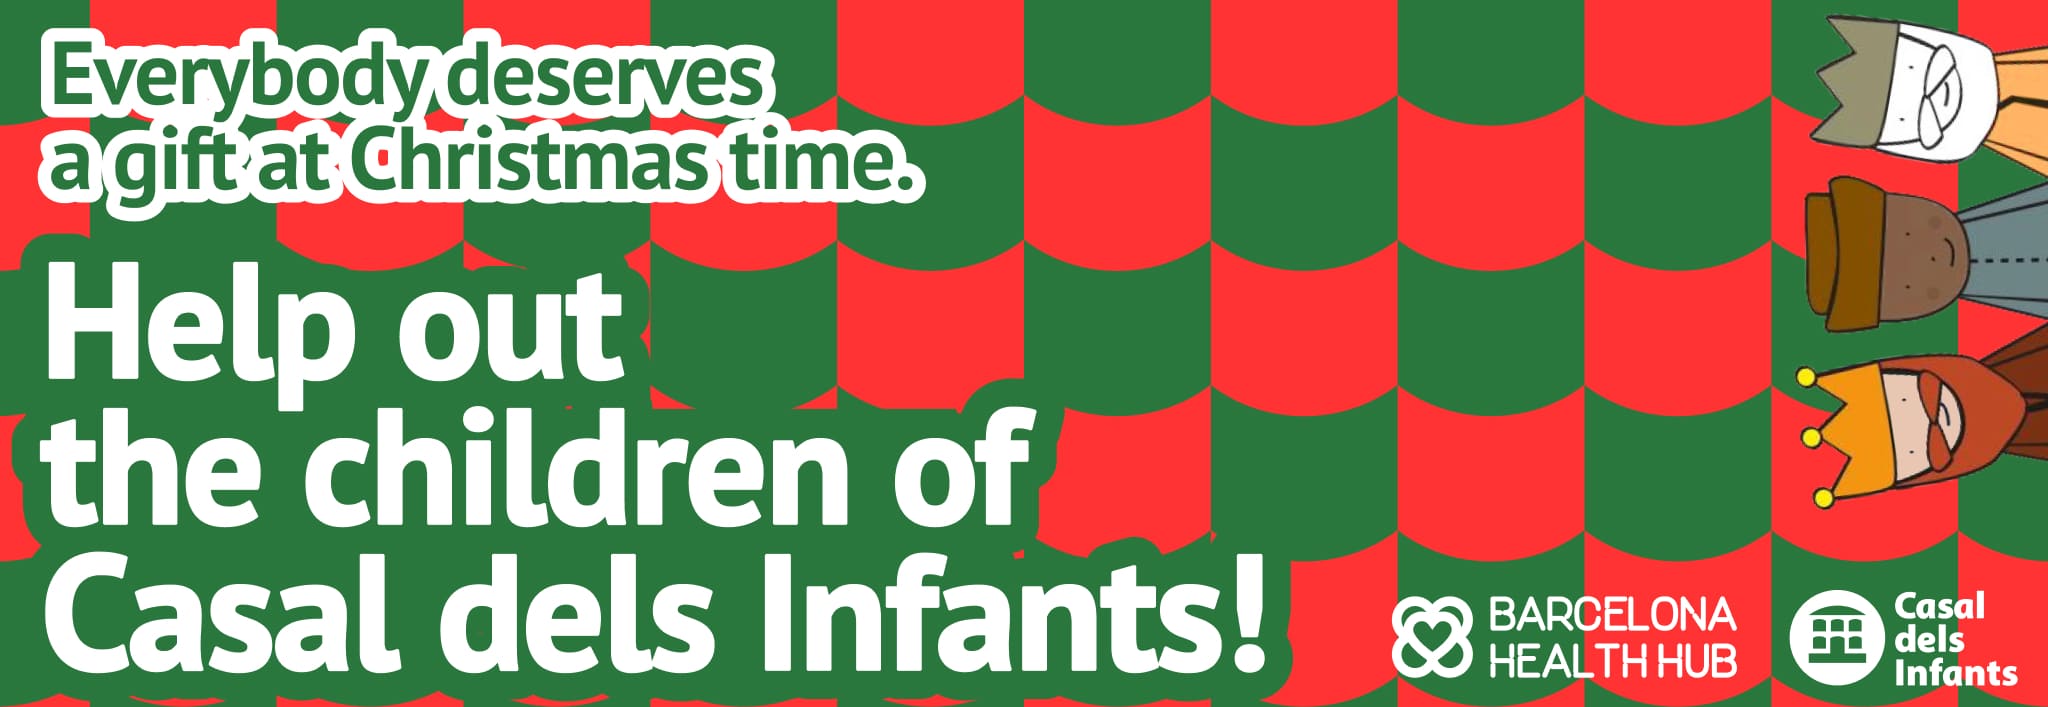 Help out the children of Casal dels Infants this Christmas!